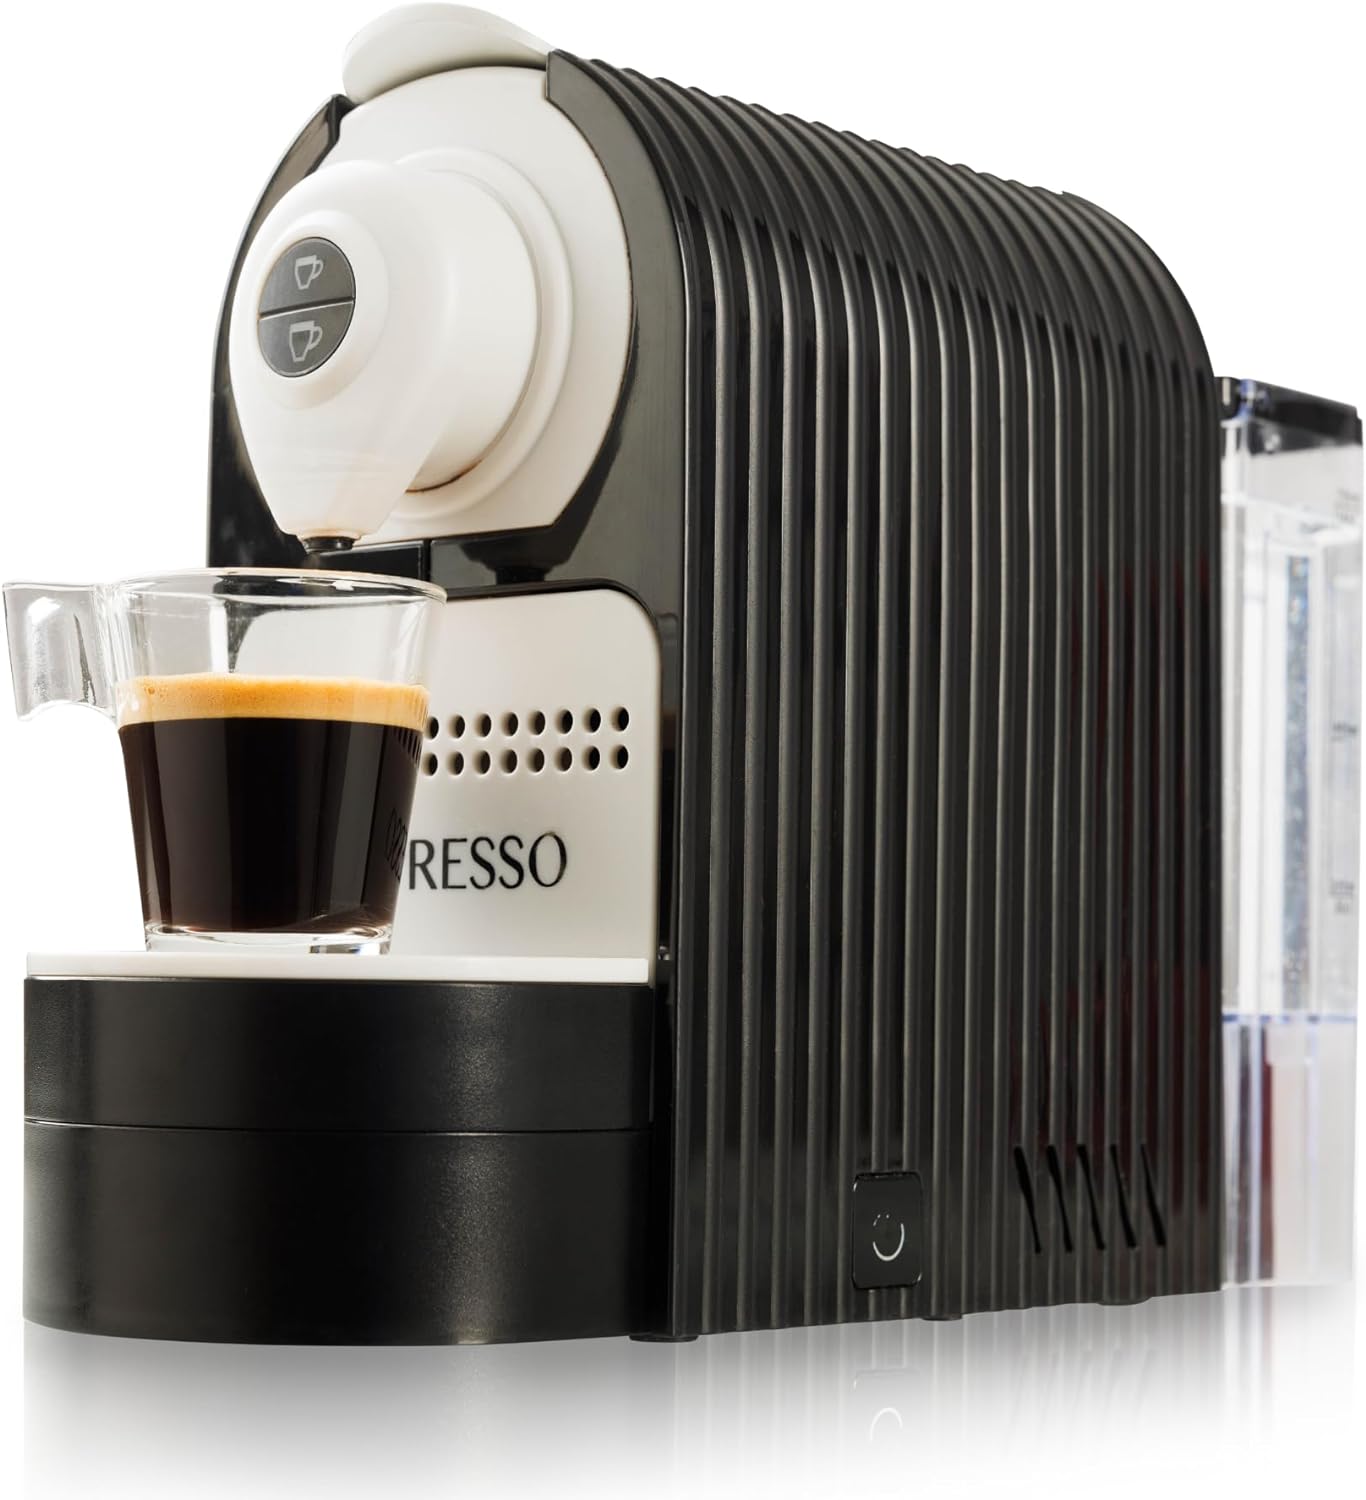 Great coffe machine. makes a amazing cup of coffee. easy to use, and good price